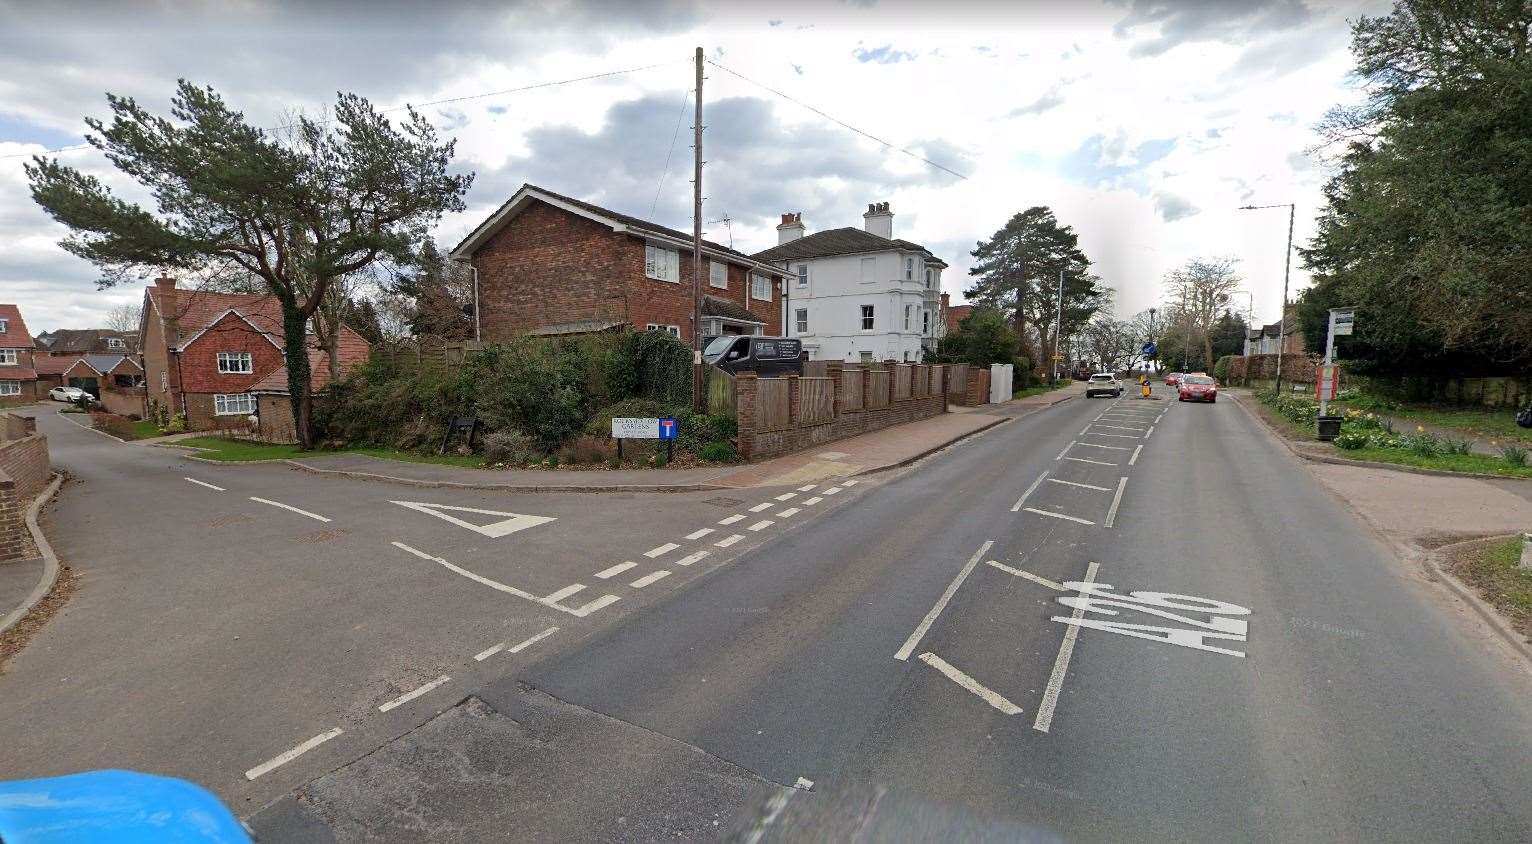 The incident occured near the A26 London Road and Rocks Hollow Gardens in Tunbridge Wells. Picture: Google